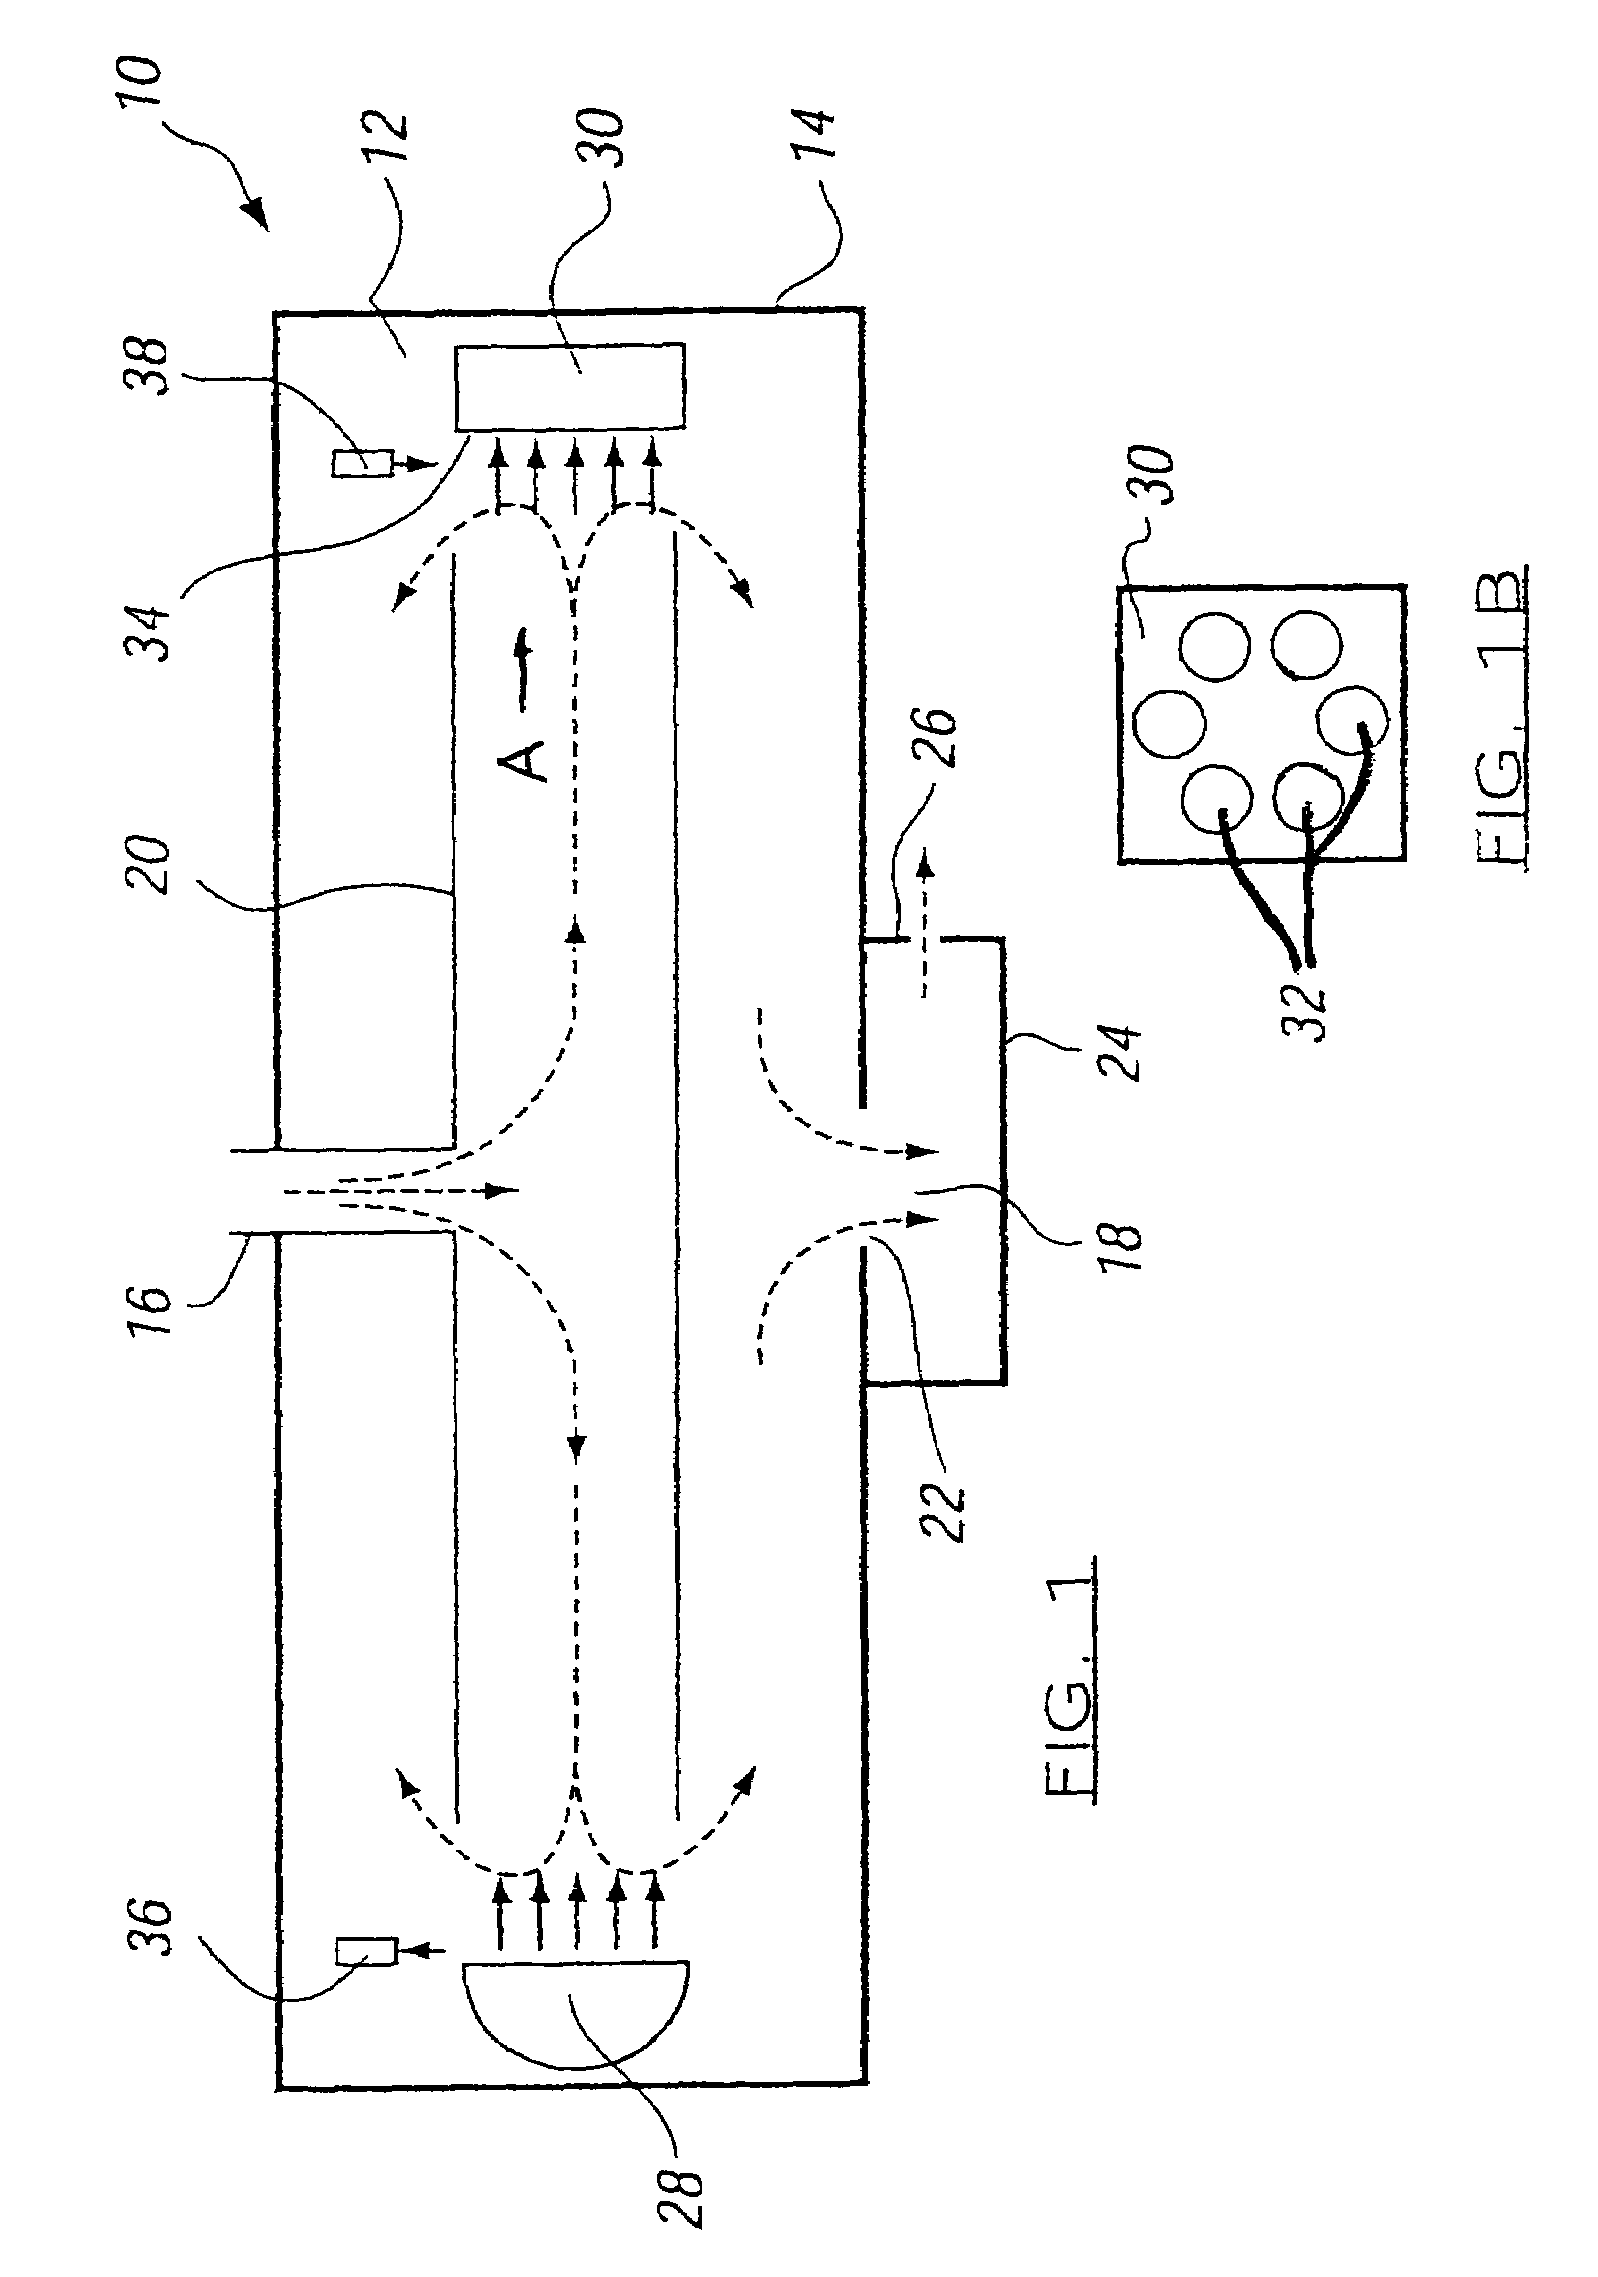 Apparatus for monitoring engine exhaust